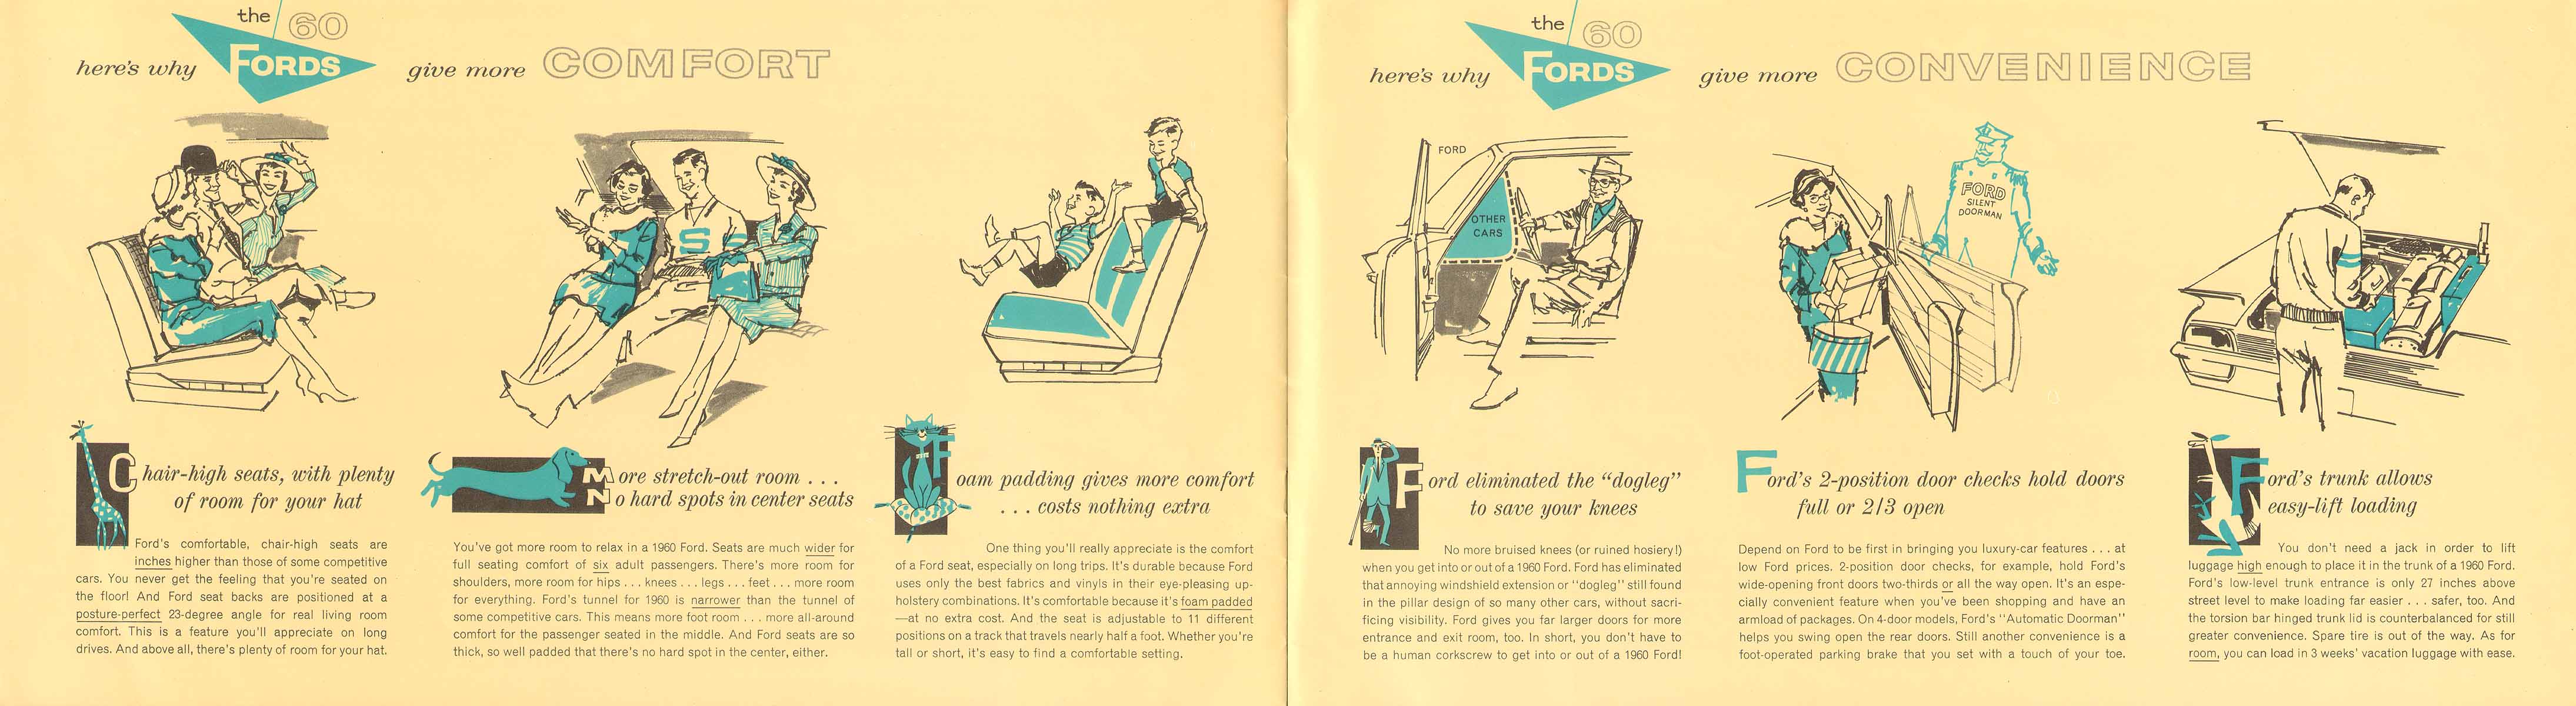 1960_Ford-18-19